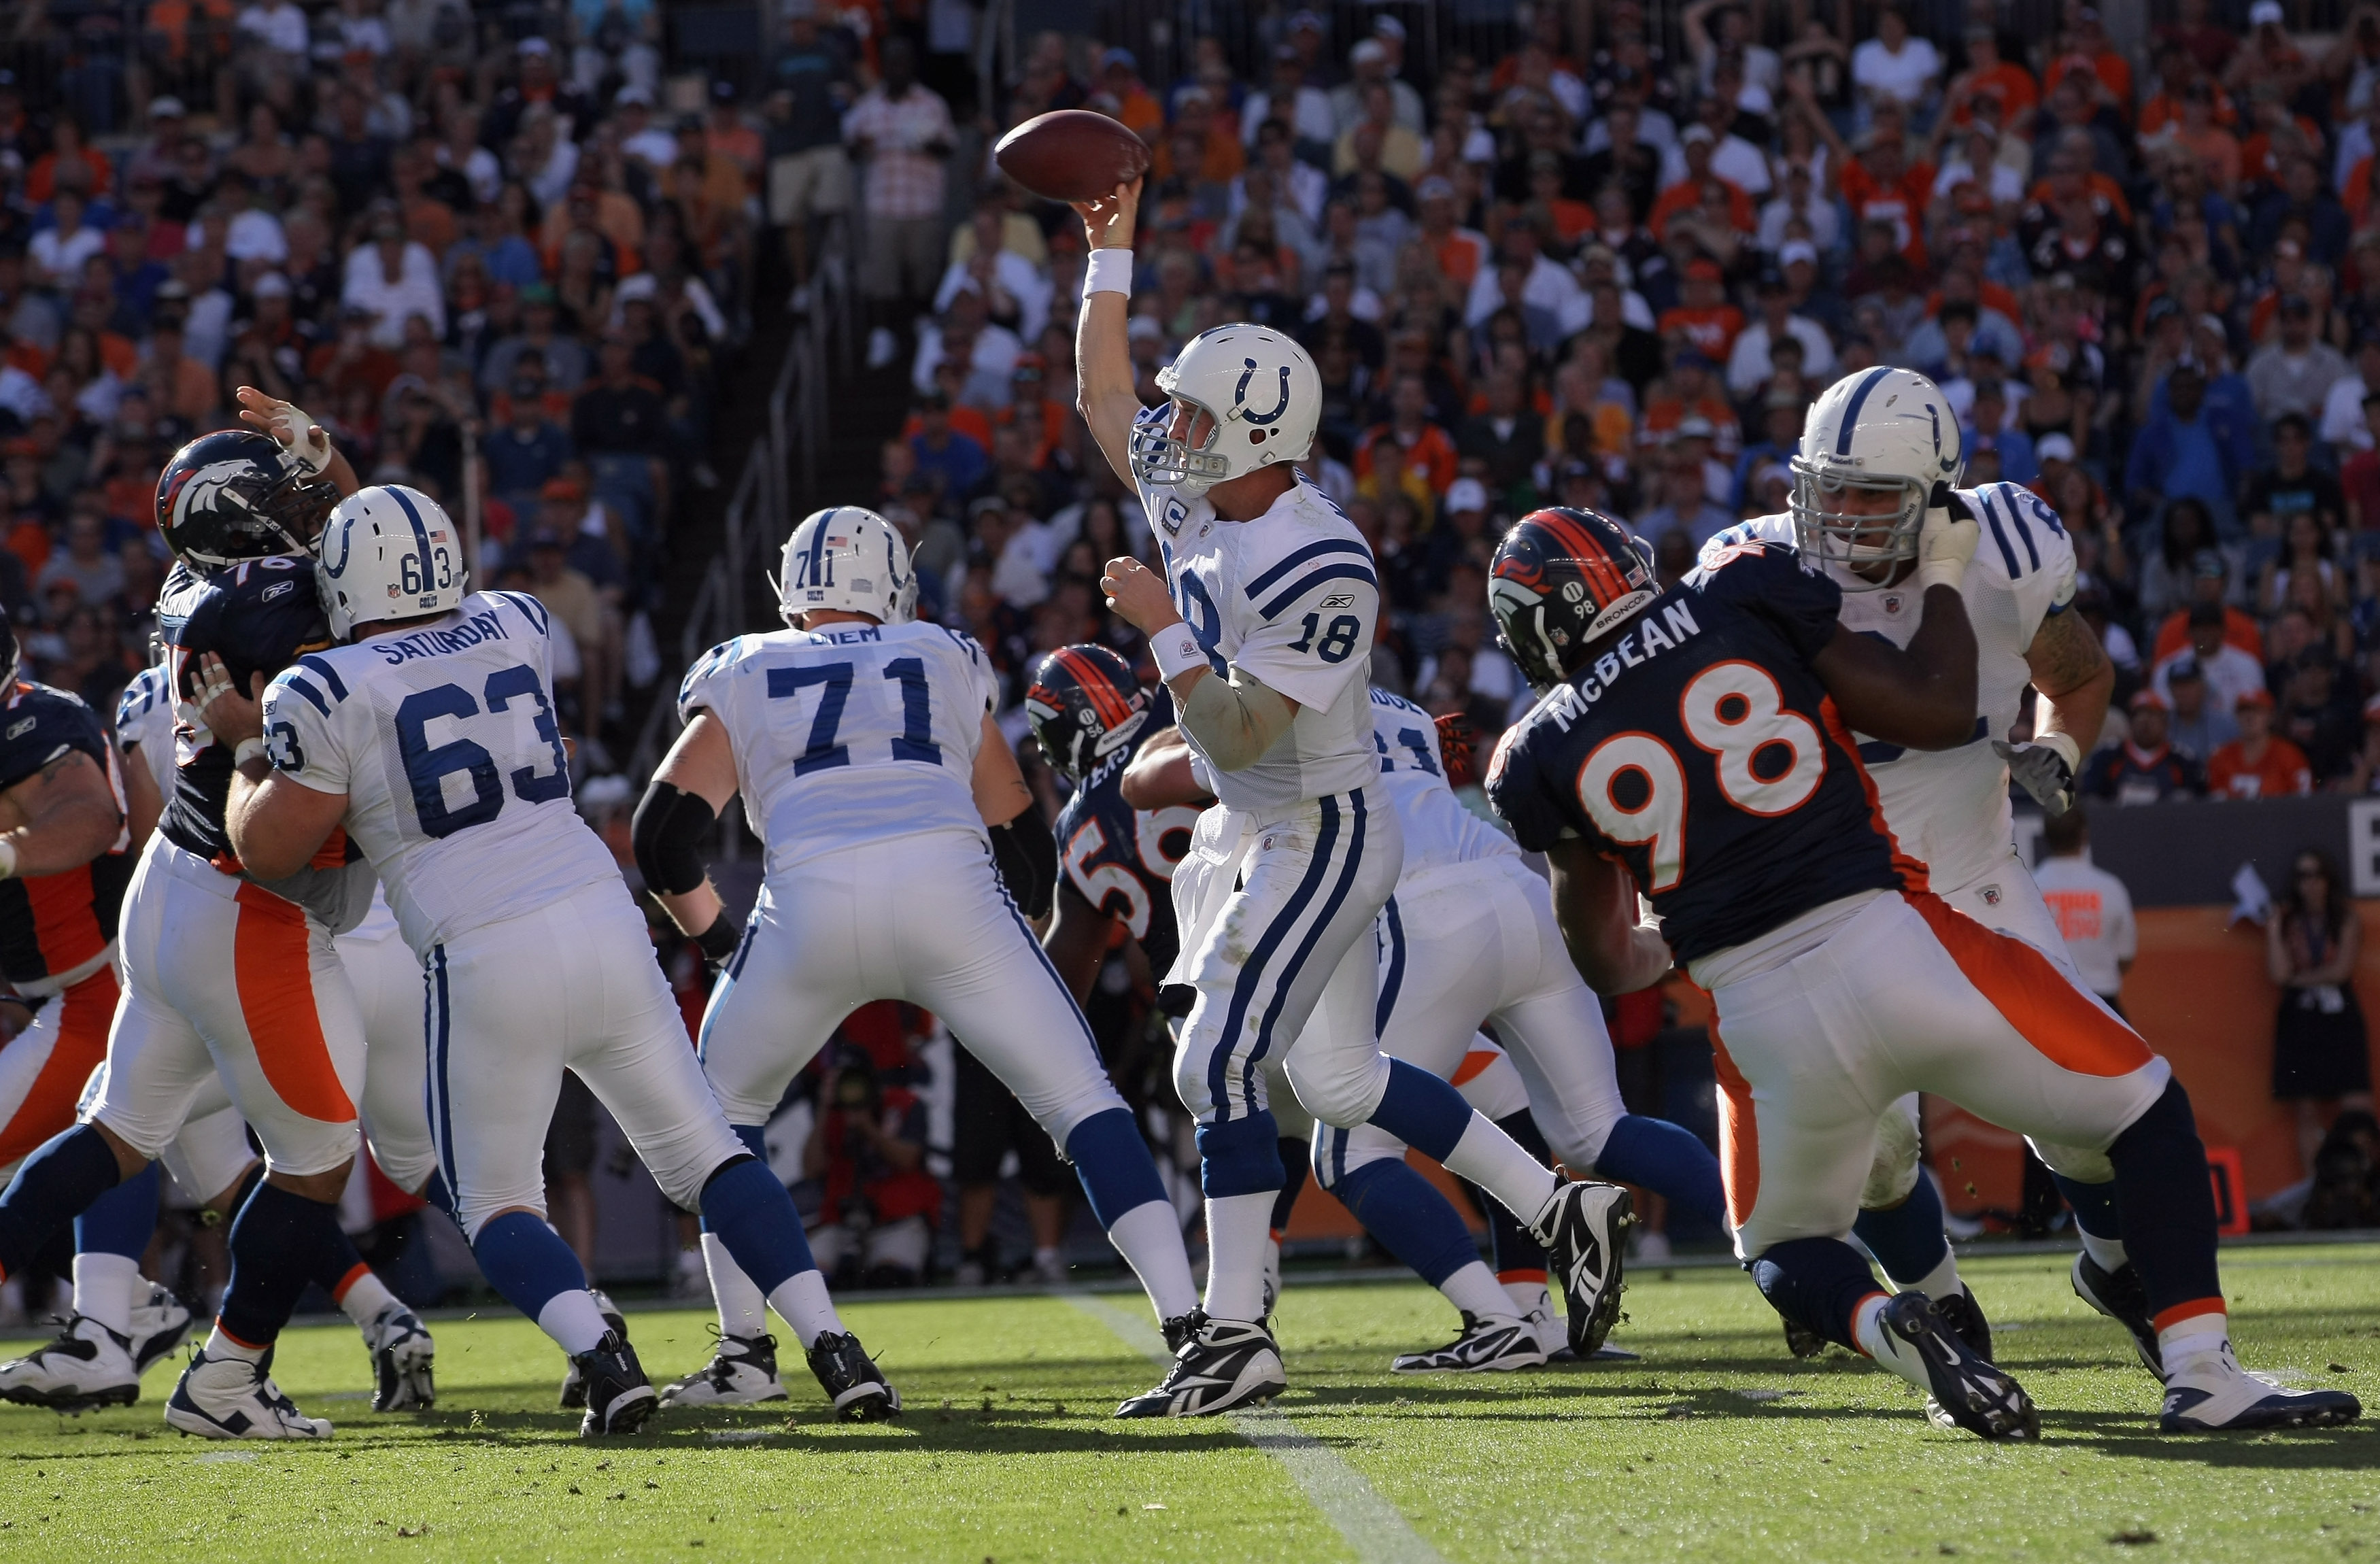 DENVER - SEPTEMBER 26:  Quarterback Peyton Manning #18 of the Indianapolis Colts is protected by his offense line as he delivers a pass against the Denver Broncos at INVESCO Field at Mile High on September 26, 2010 in Denver, Colorado. The Colts defeated